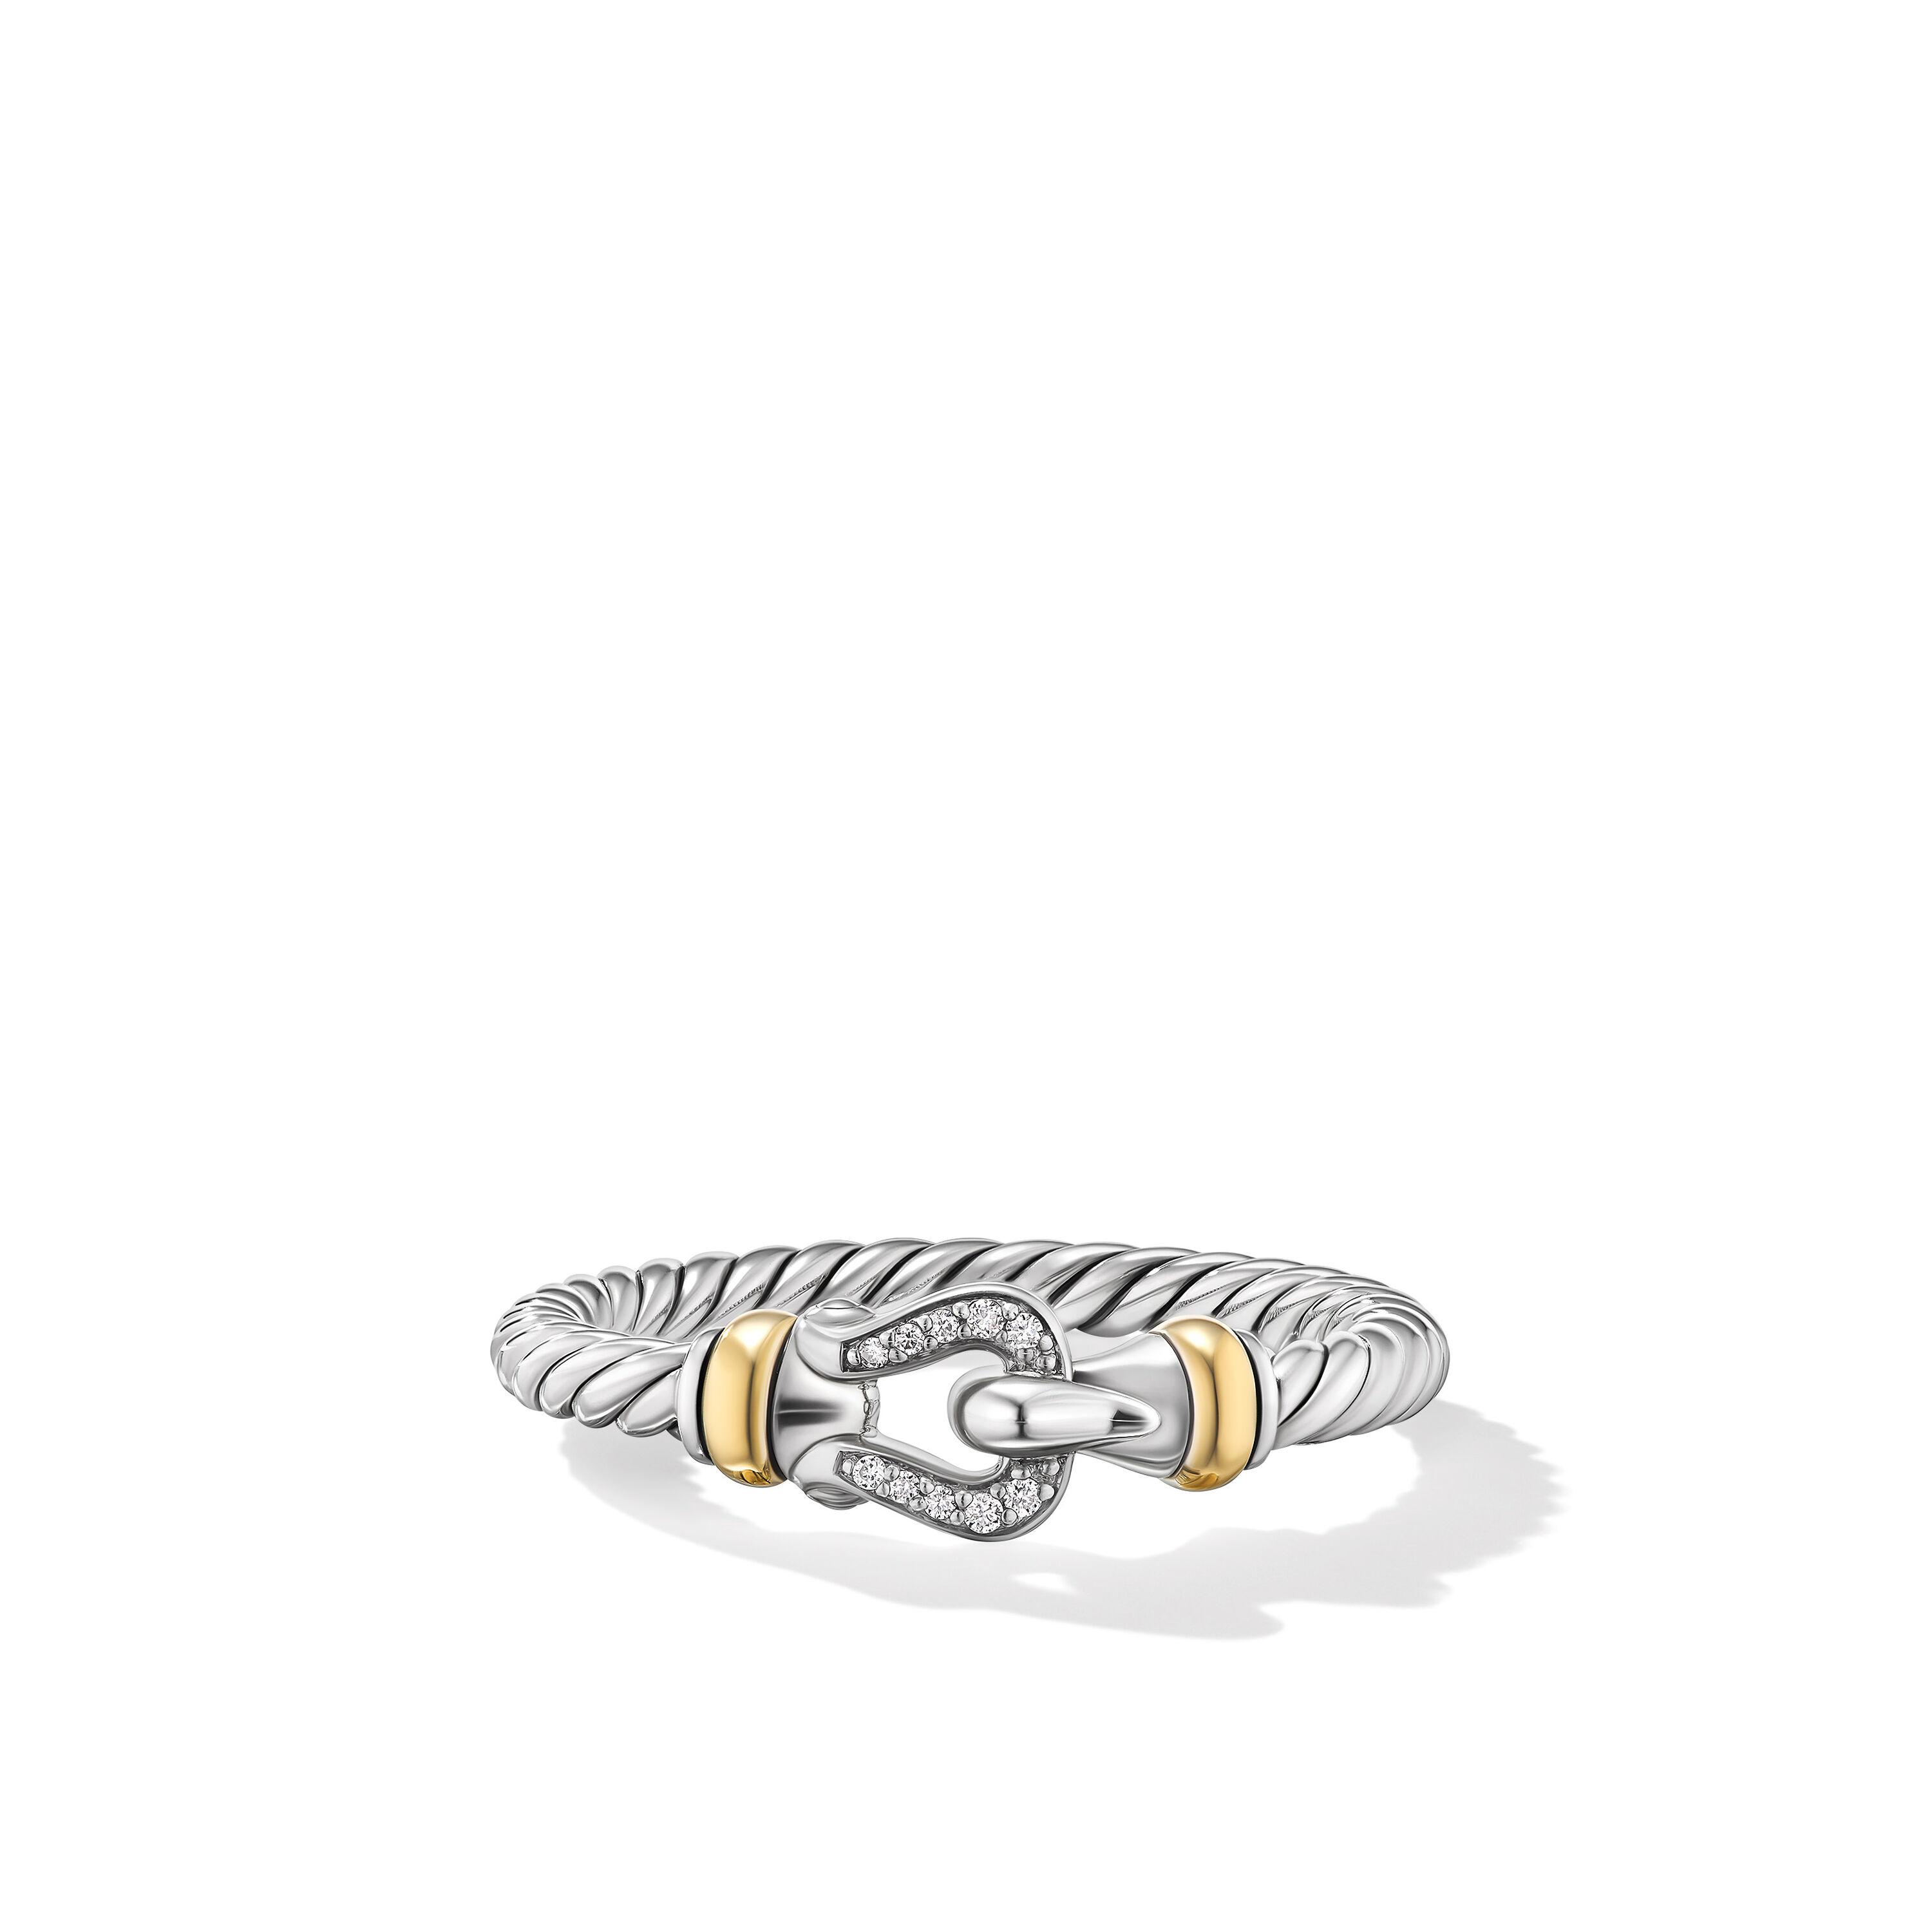 David Yurman Sterling Silver Petite Buckle Ring with 18k Yellow Gold and Diamonds, Size 6